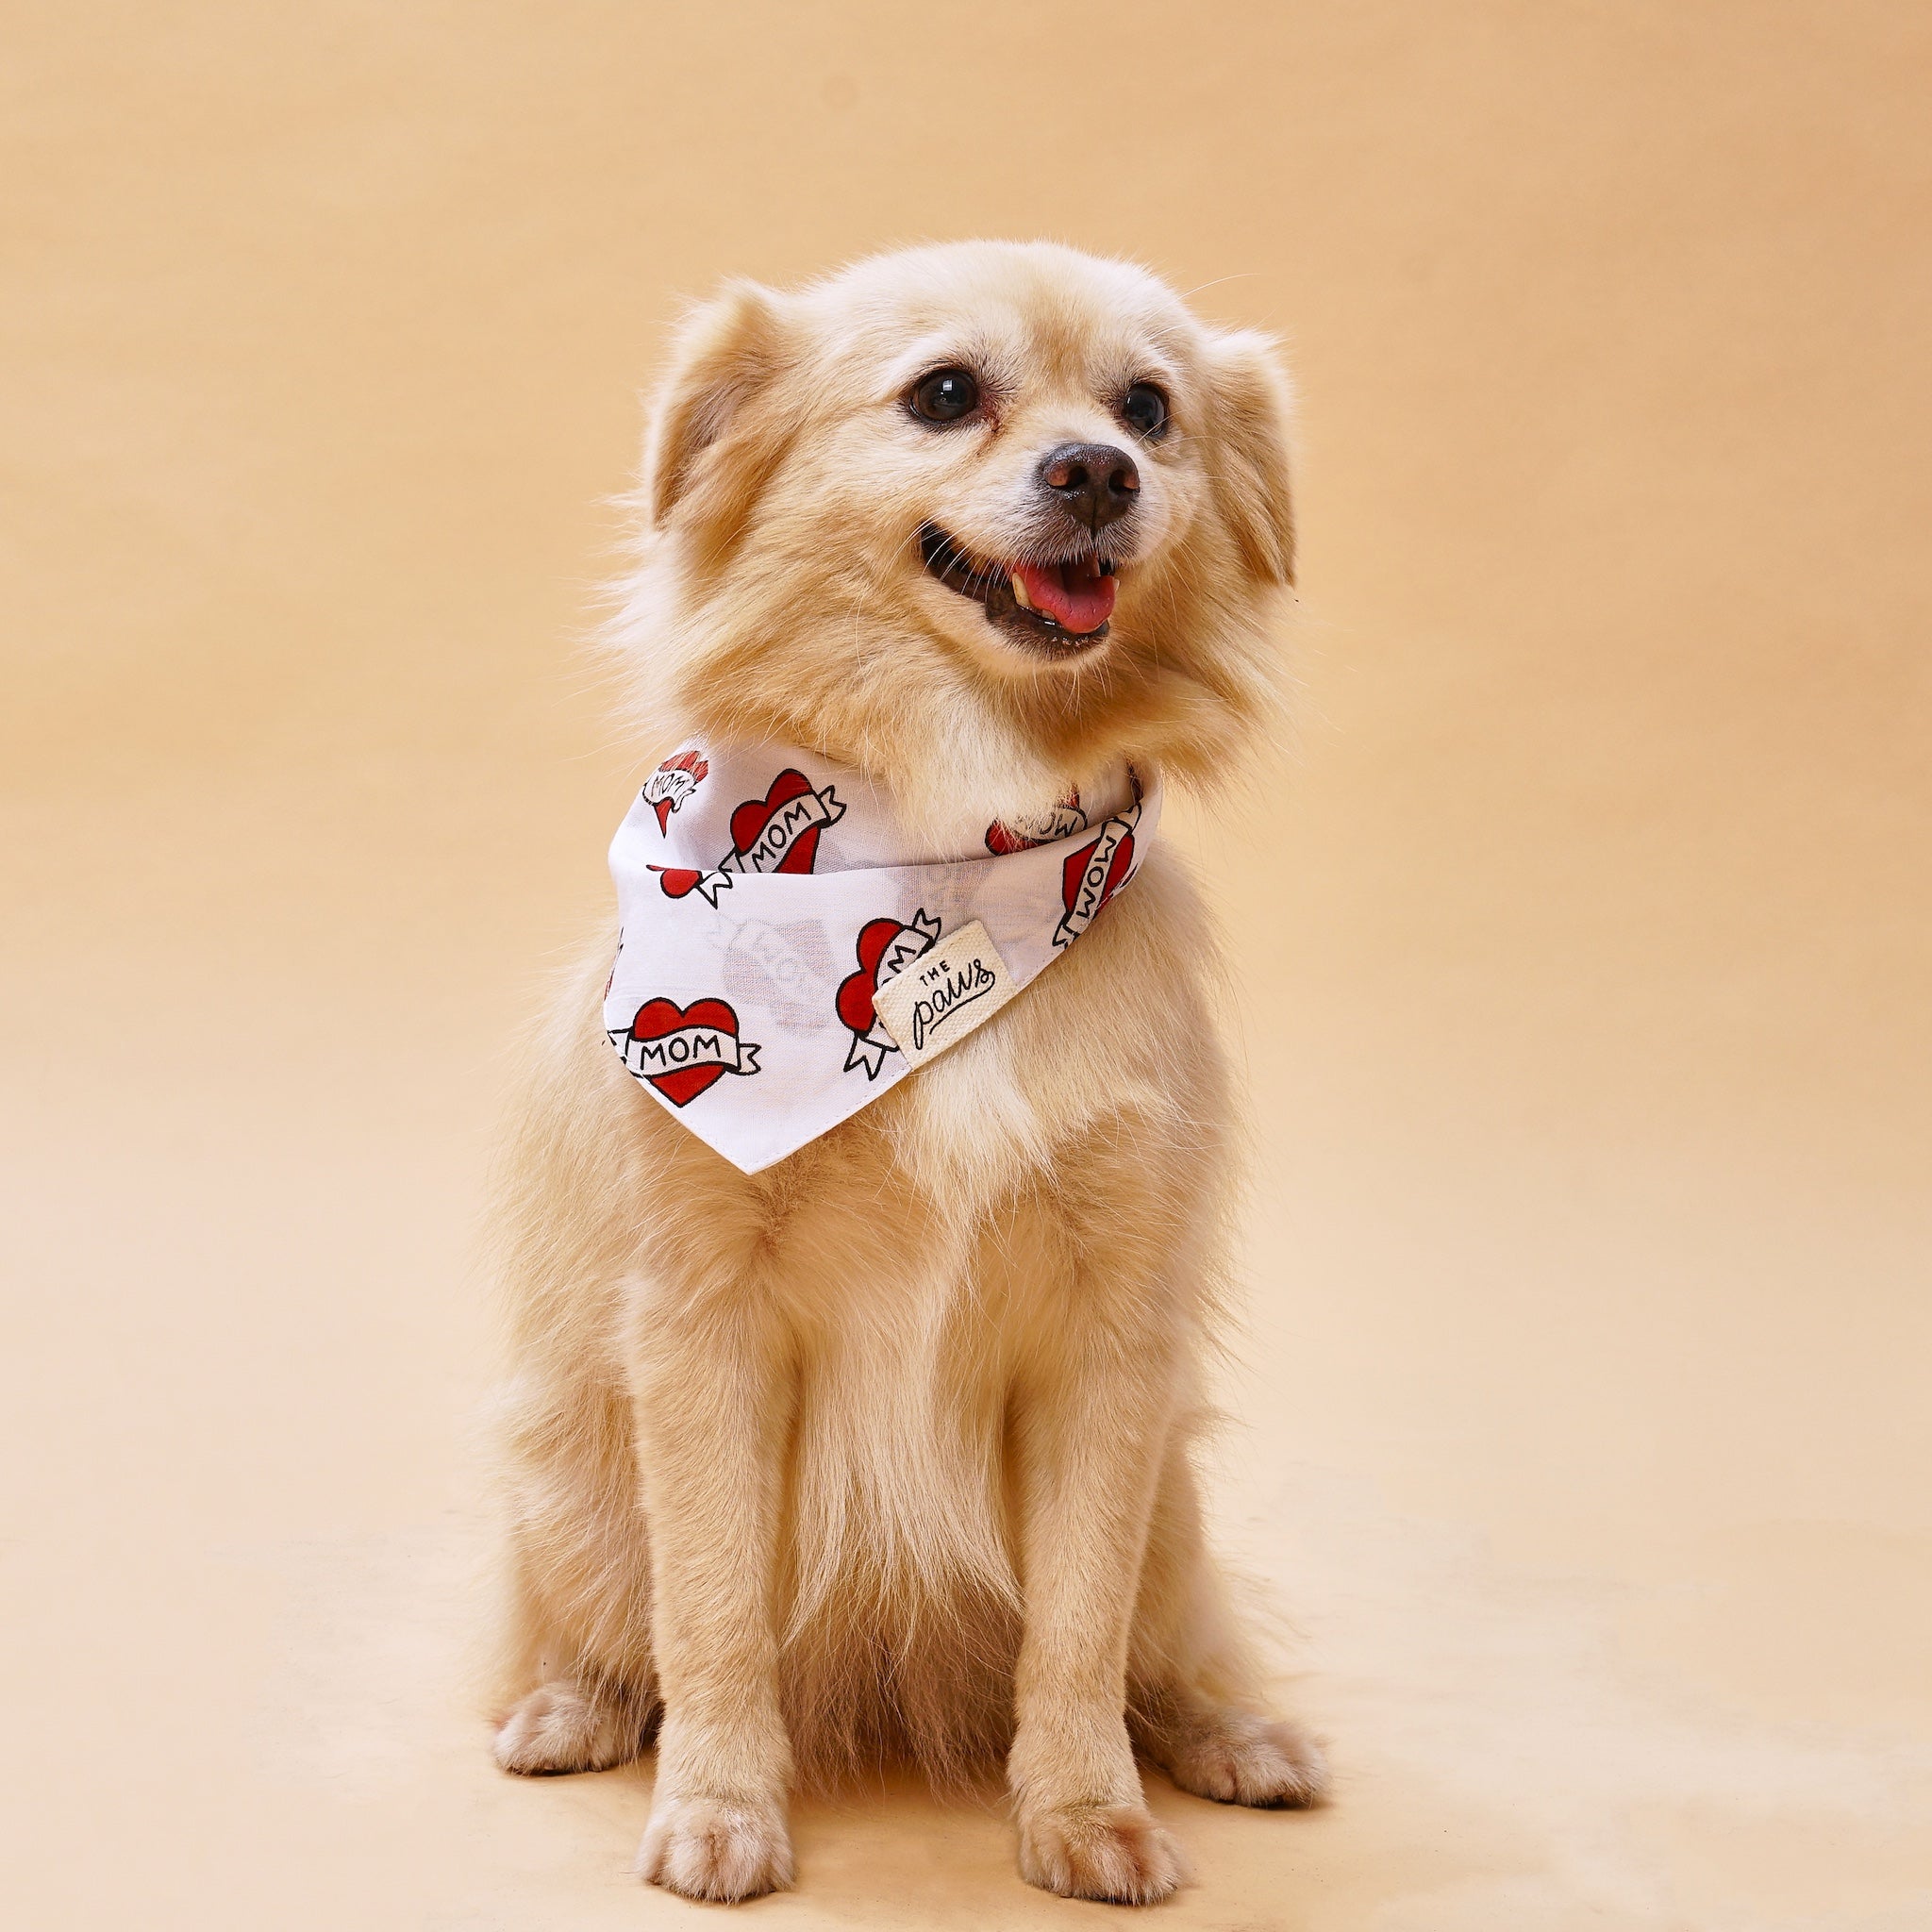 Love Mom Dog Bandana from The Paws